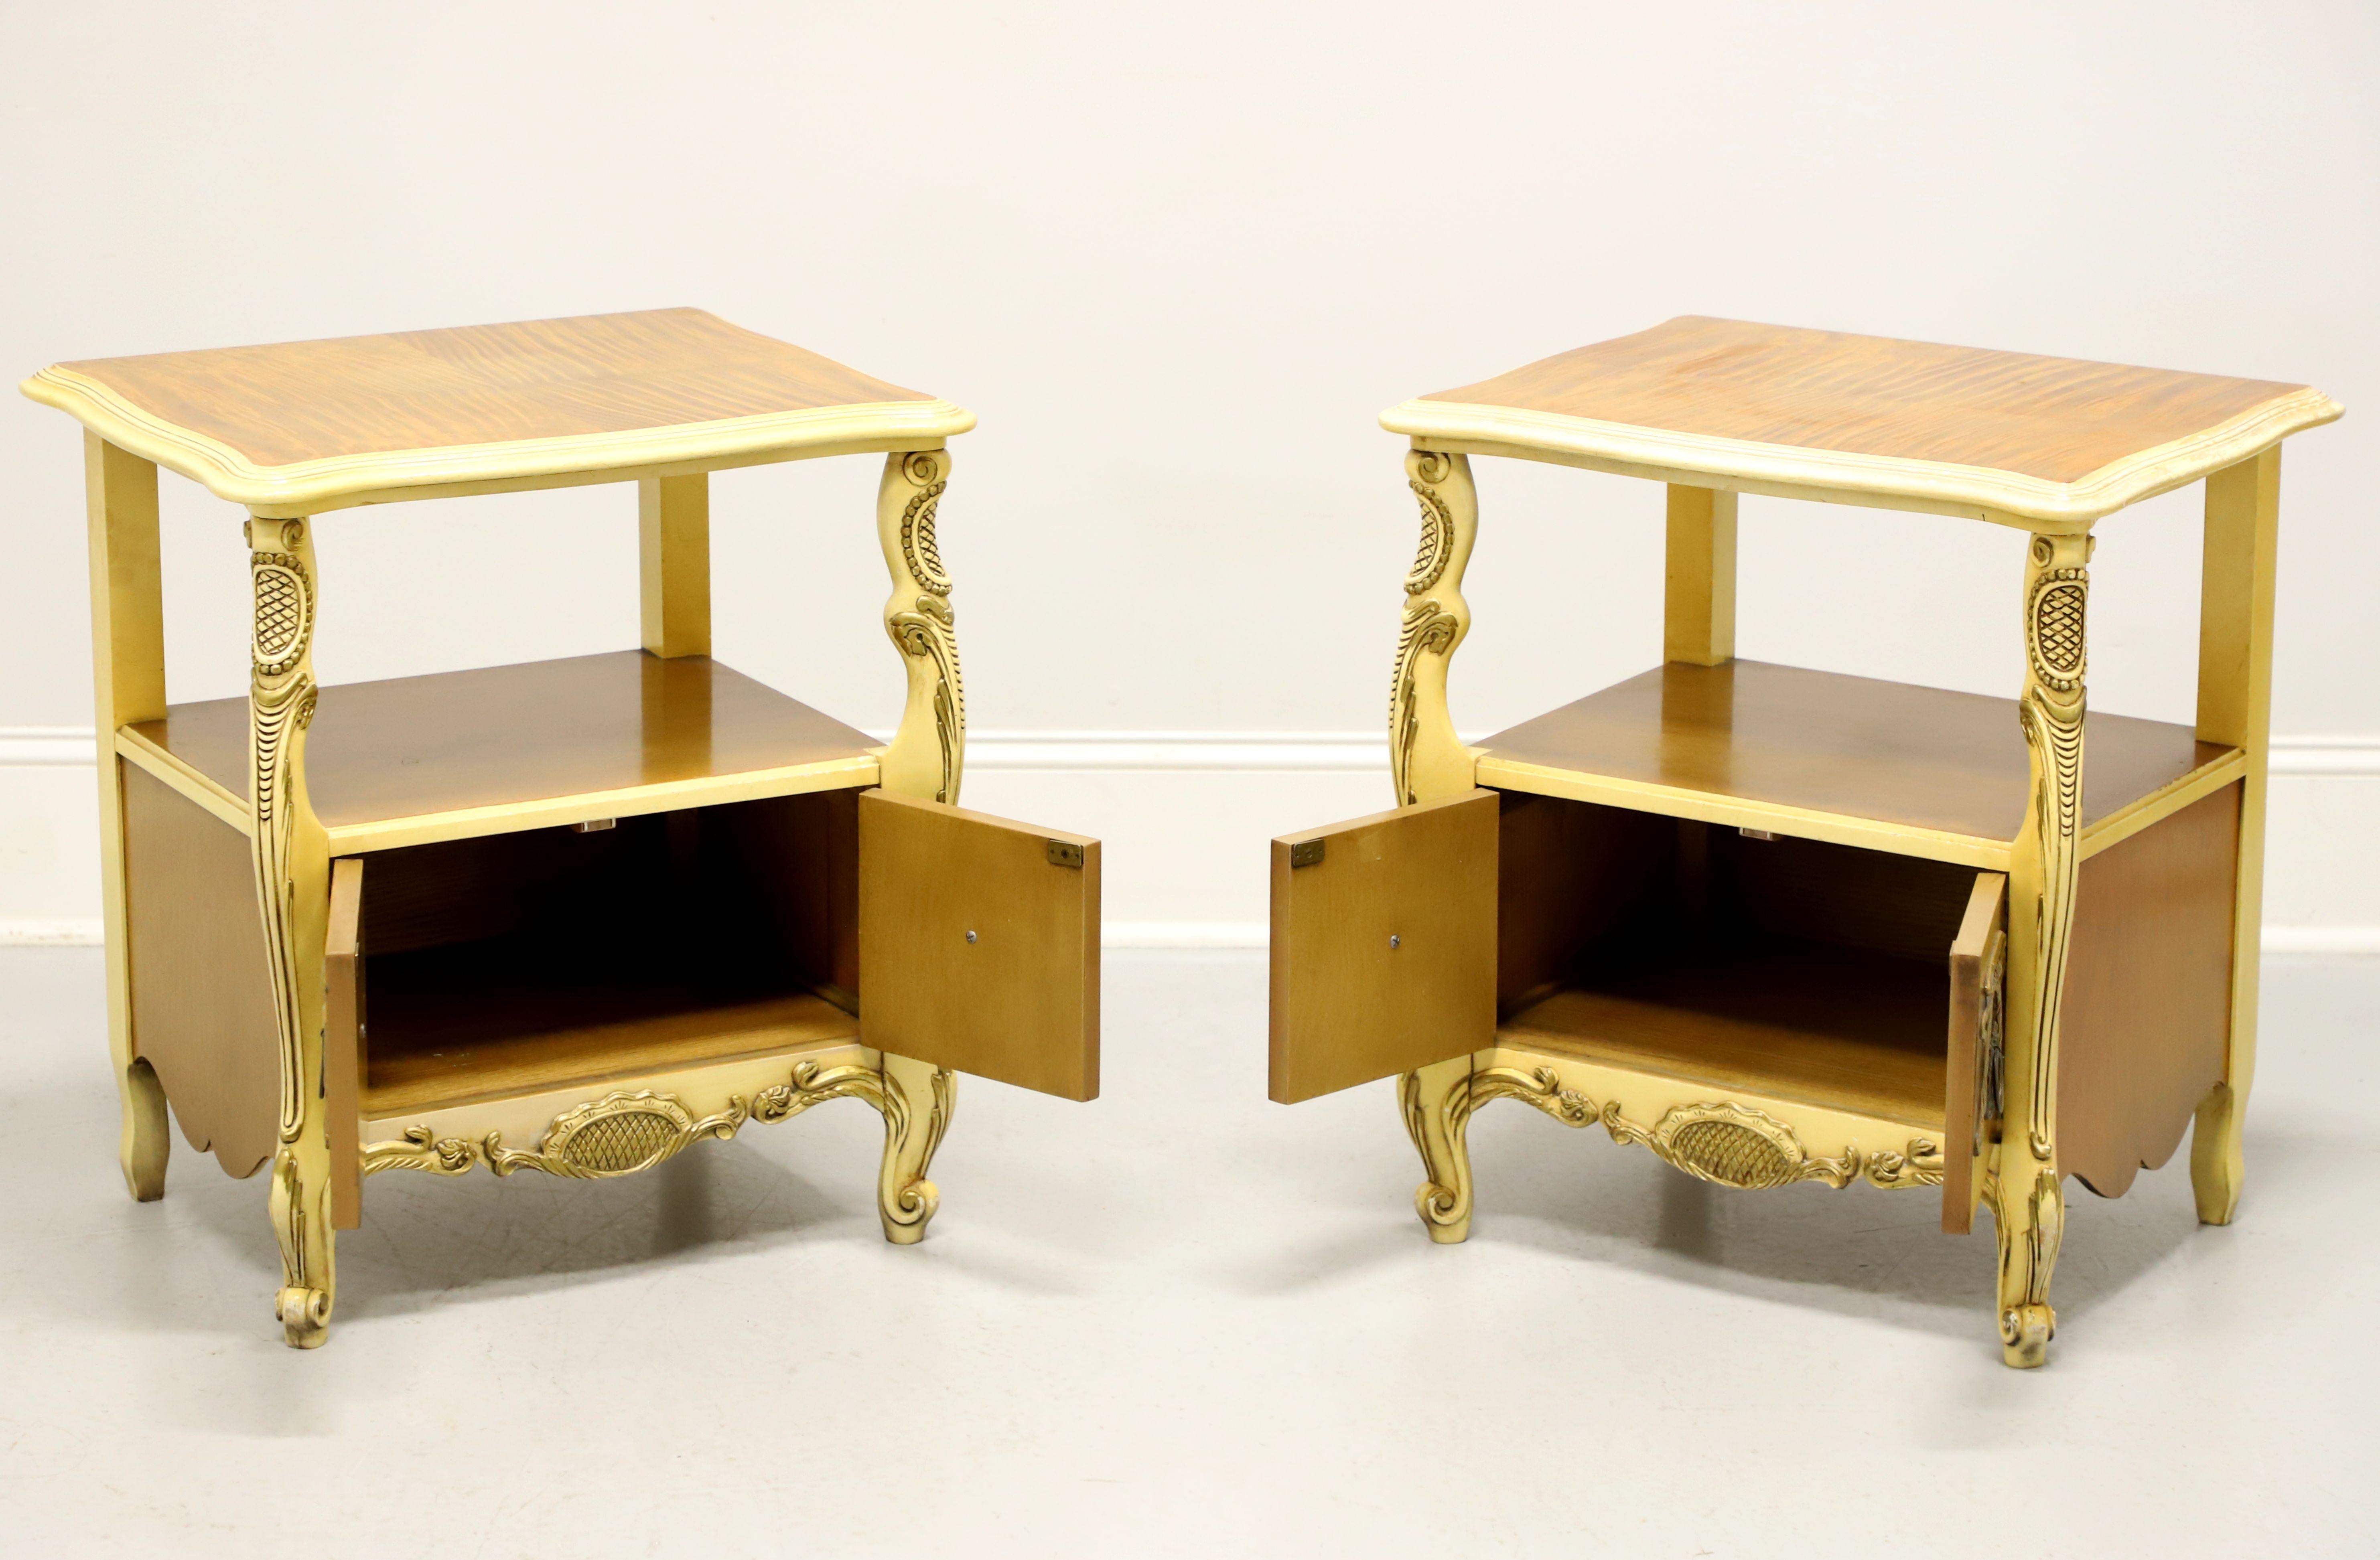 Brass ROMWEBER Mid 20th Century Satinwood French Provincial Nightstands - Pair